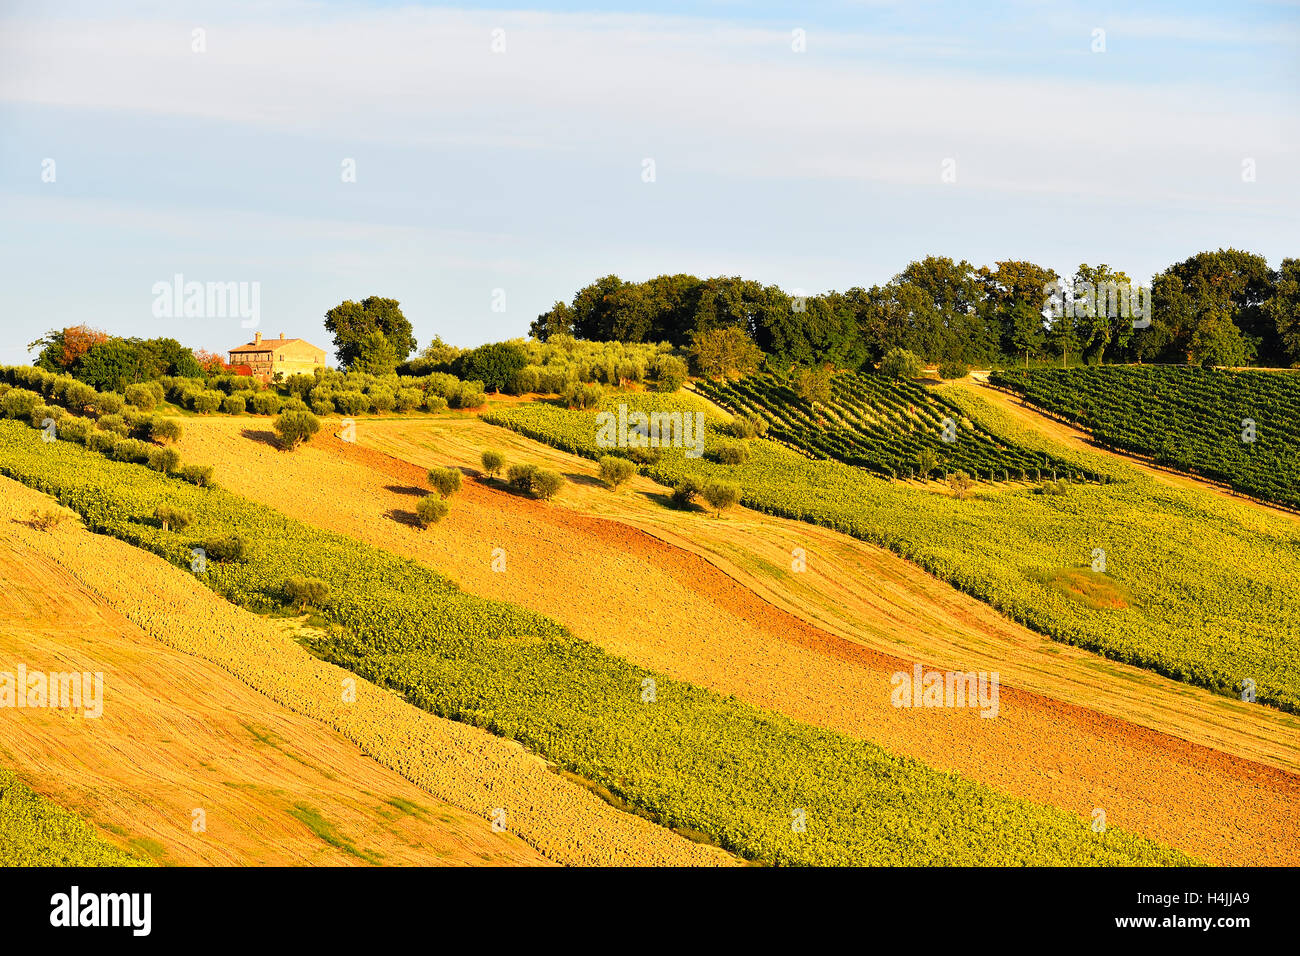 Sunflower fields and vineyards, Sant&#39;Amico, Morro D&#39;Alba, Marche, Italy Stock Photo